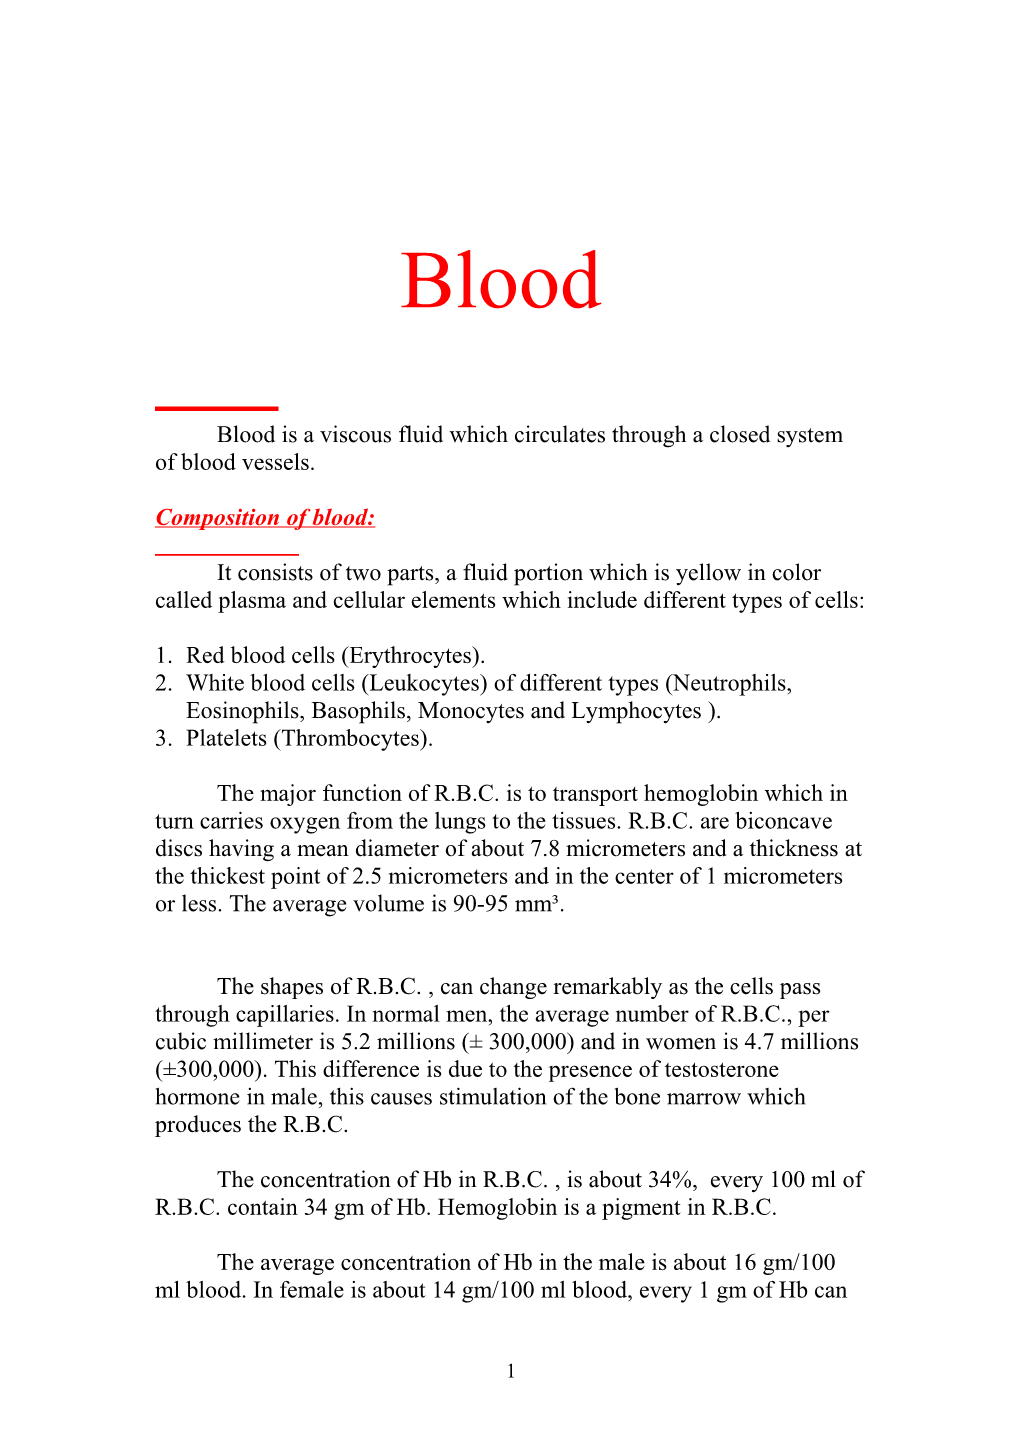 Blood Is a Viscous Fluid Which Circulates Through a Closed System of Blood Vessels